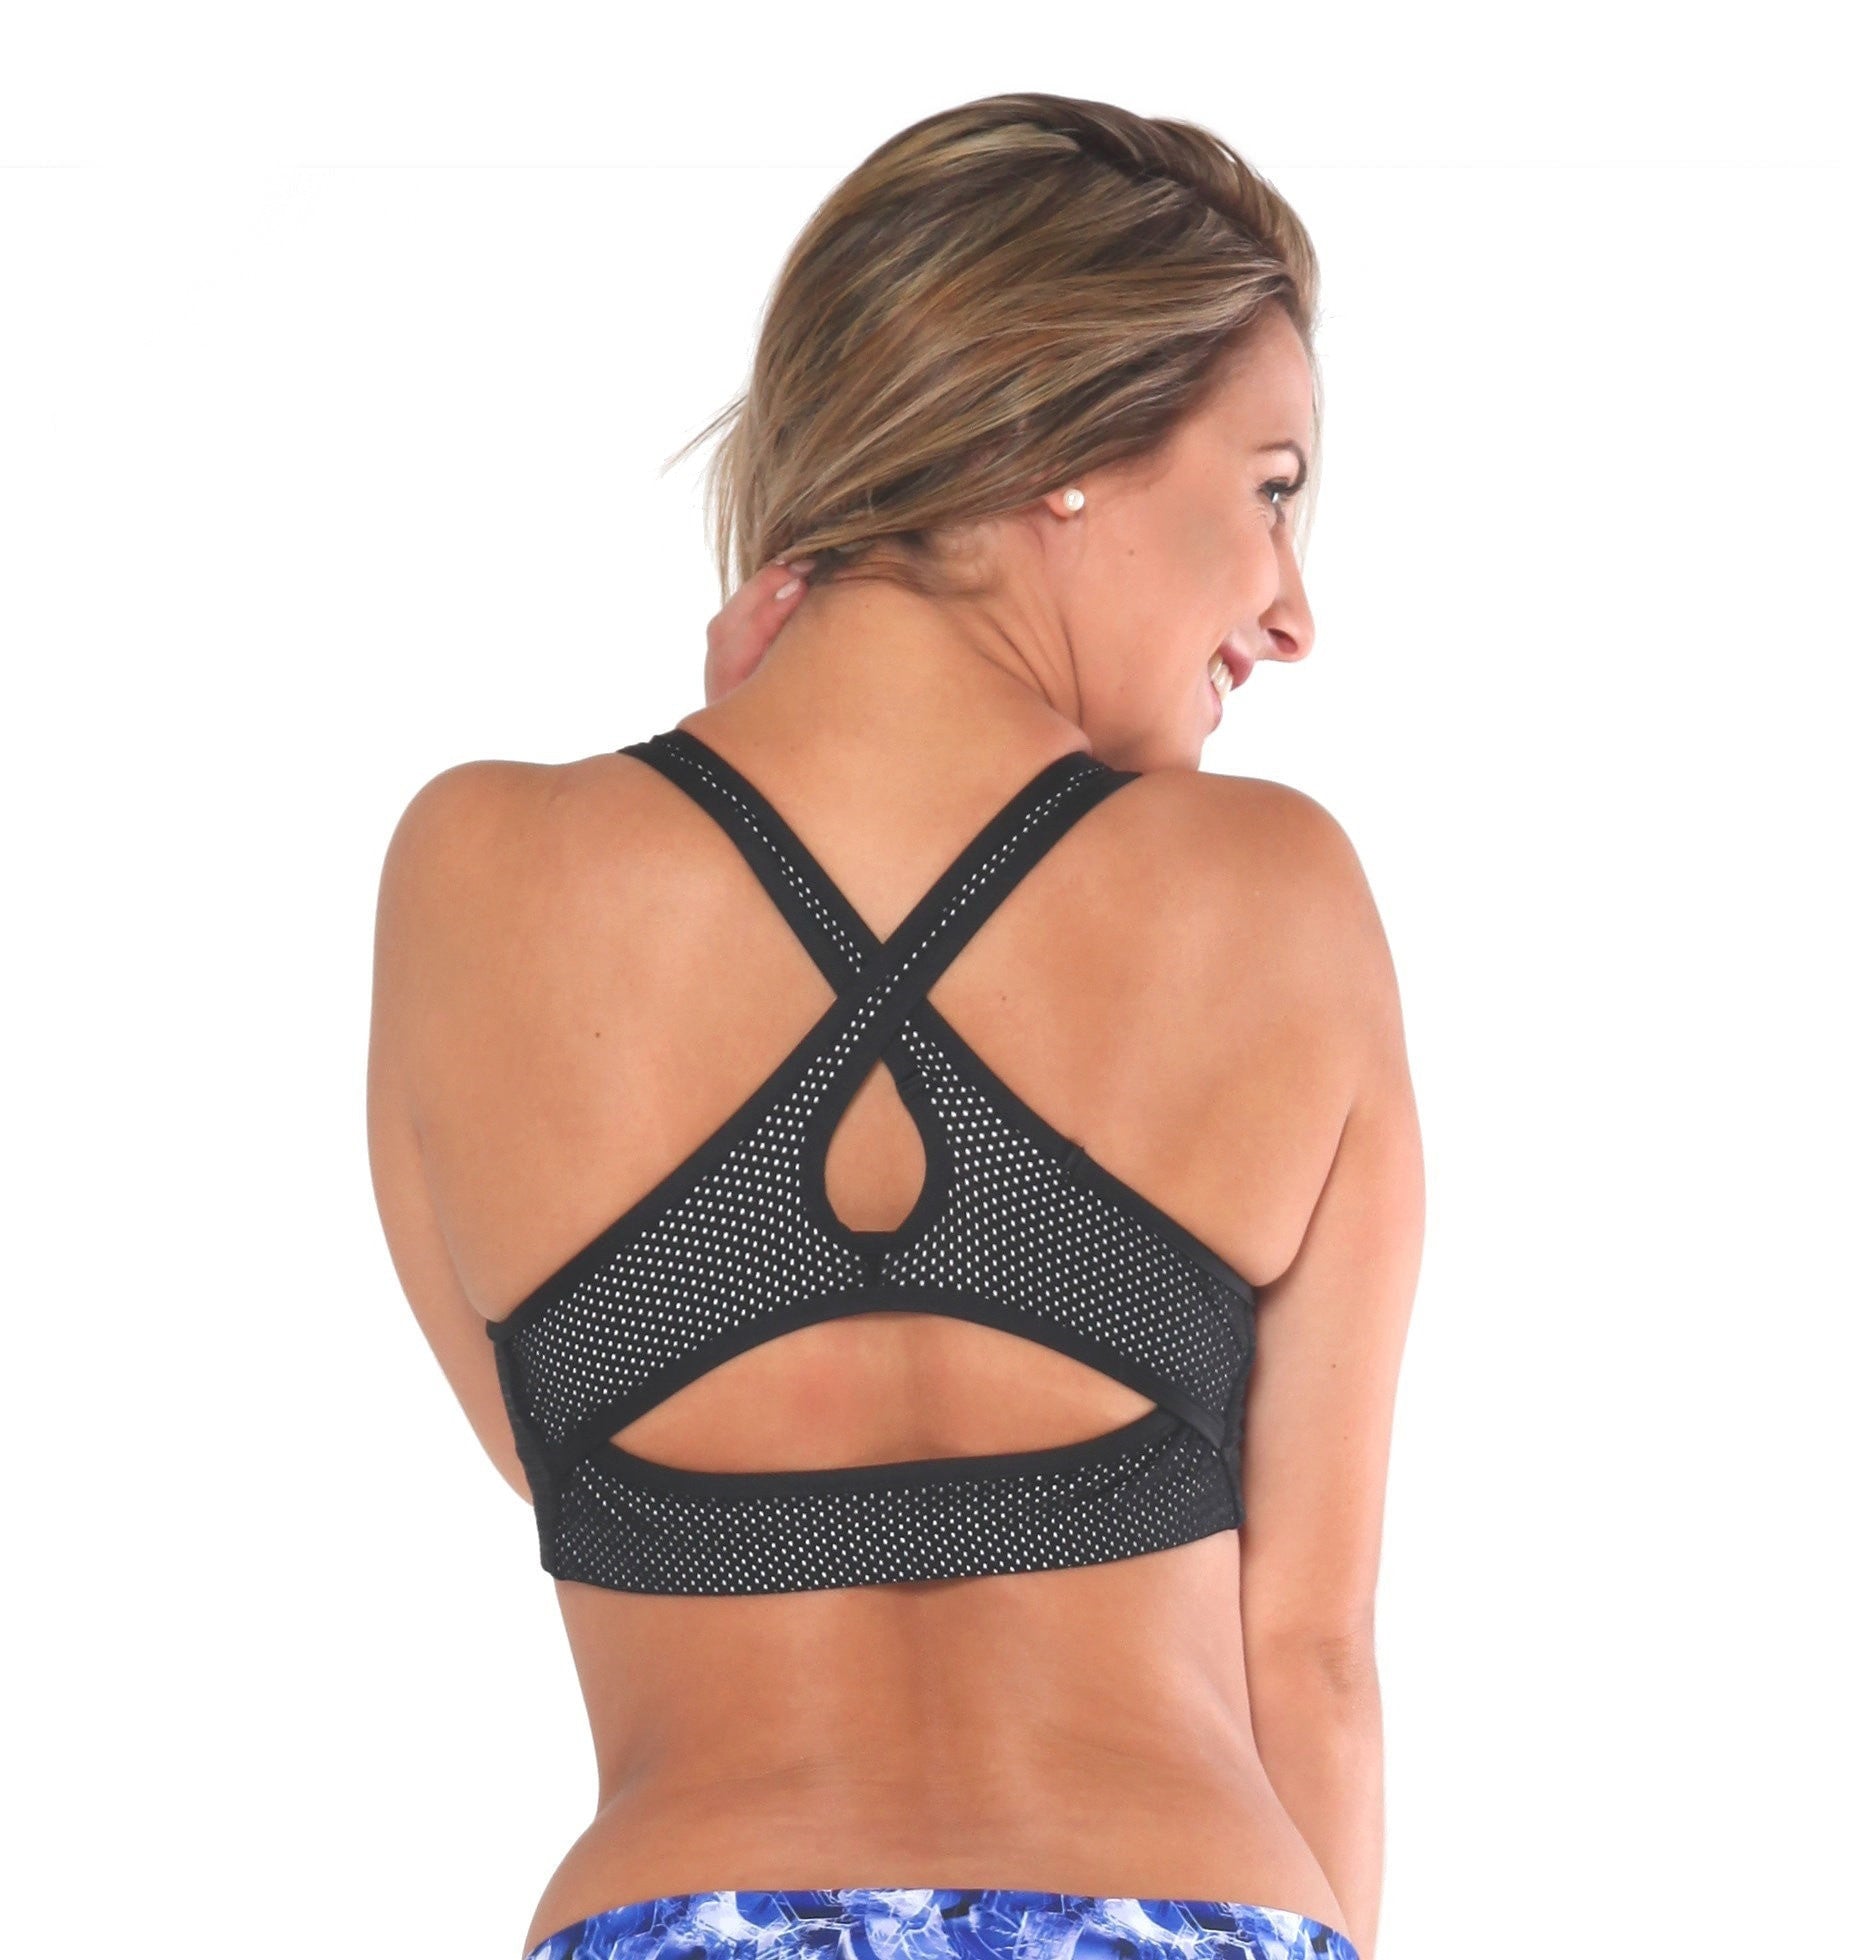 Monochrome Sports Mesh V Neck Max Impact Crop Top - Be Activewear